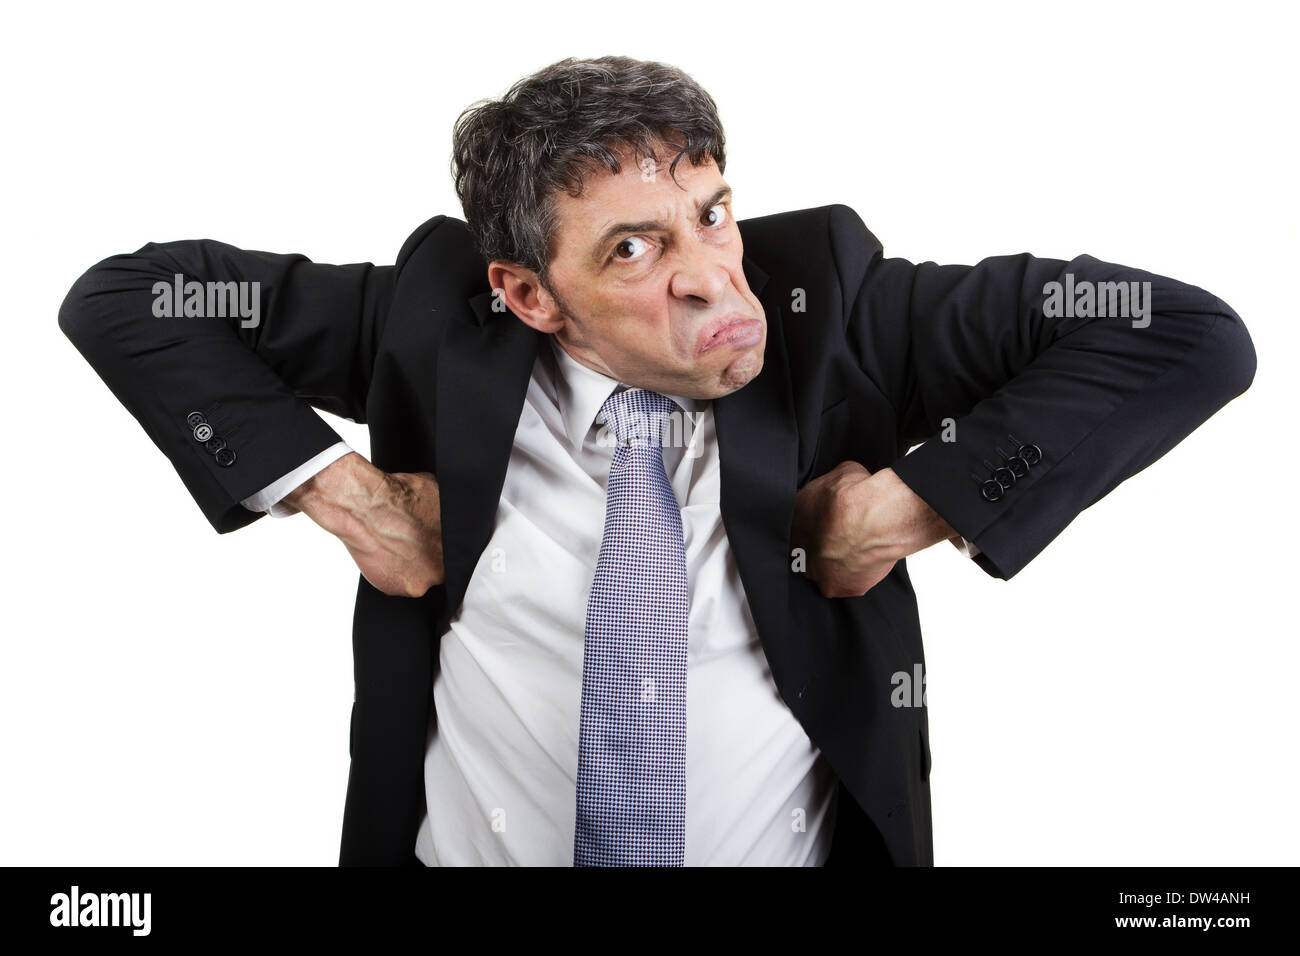 Weird businessman doing the monkey business moves Stock Photo